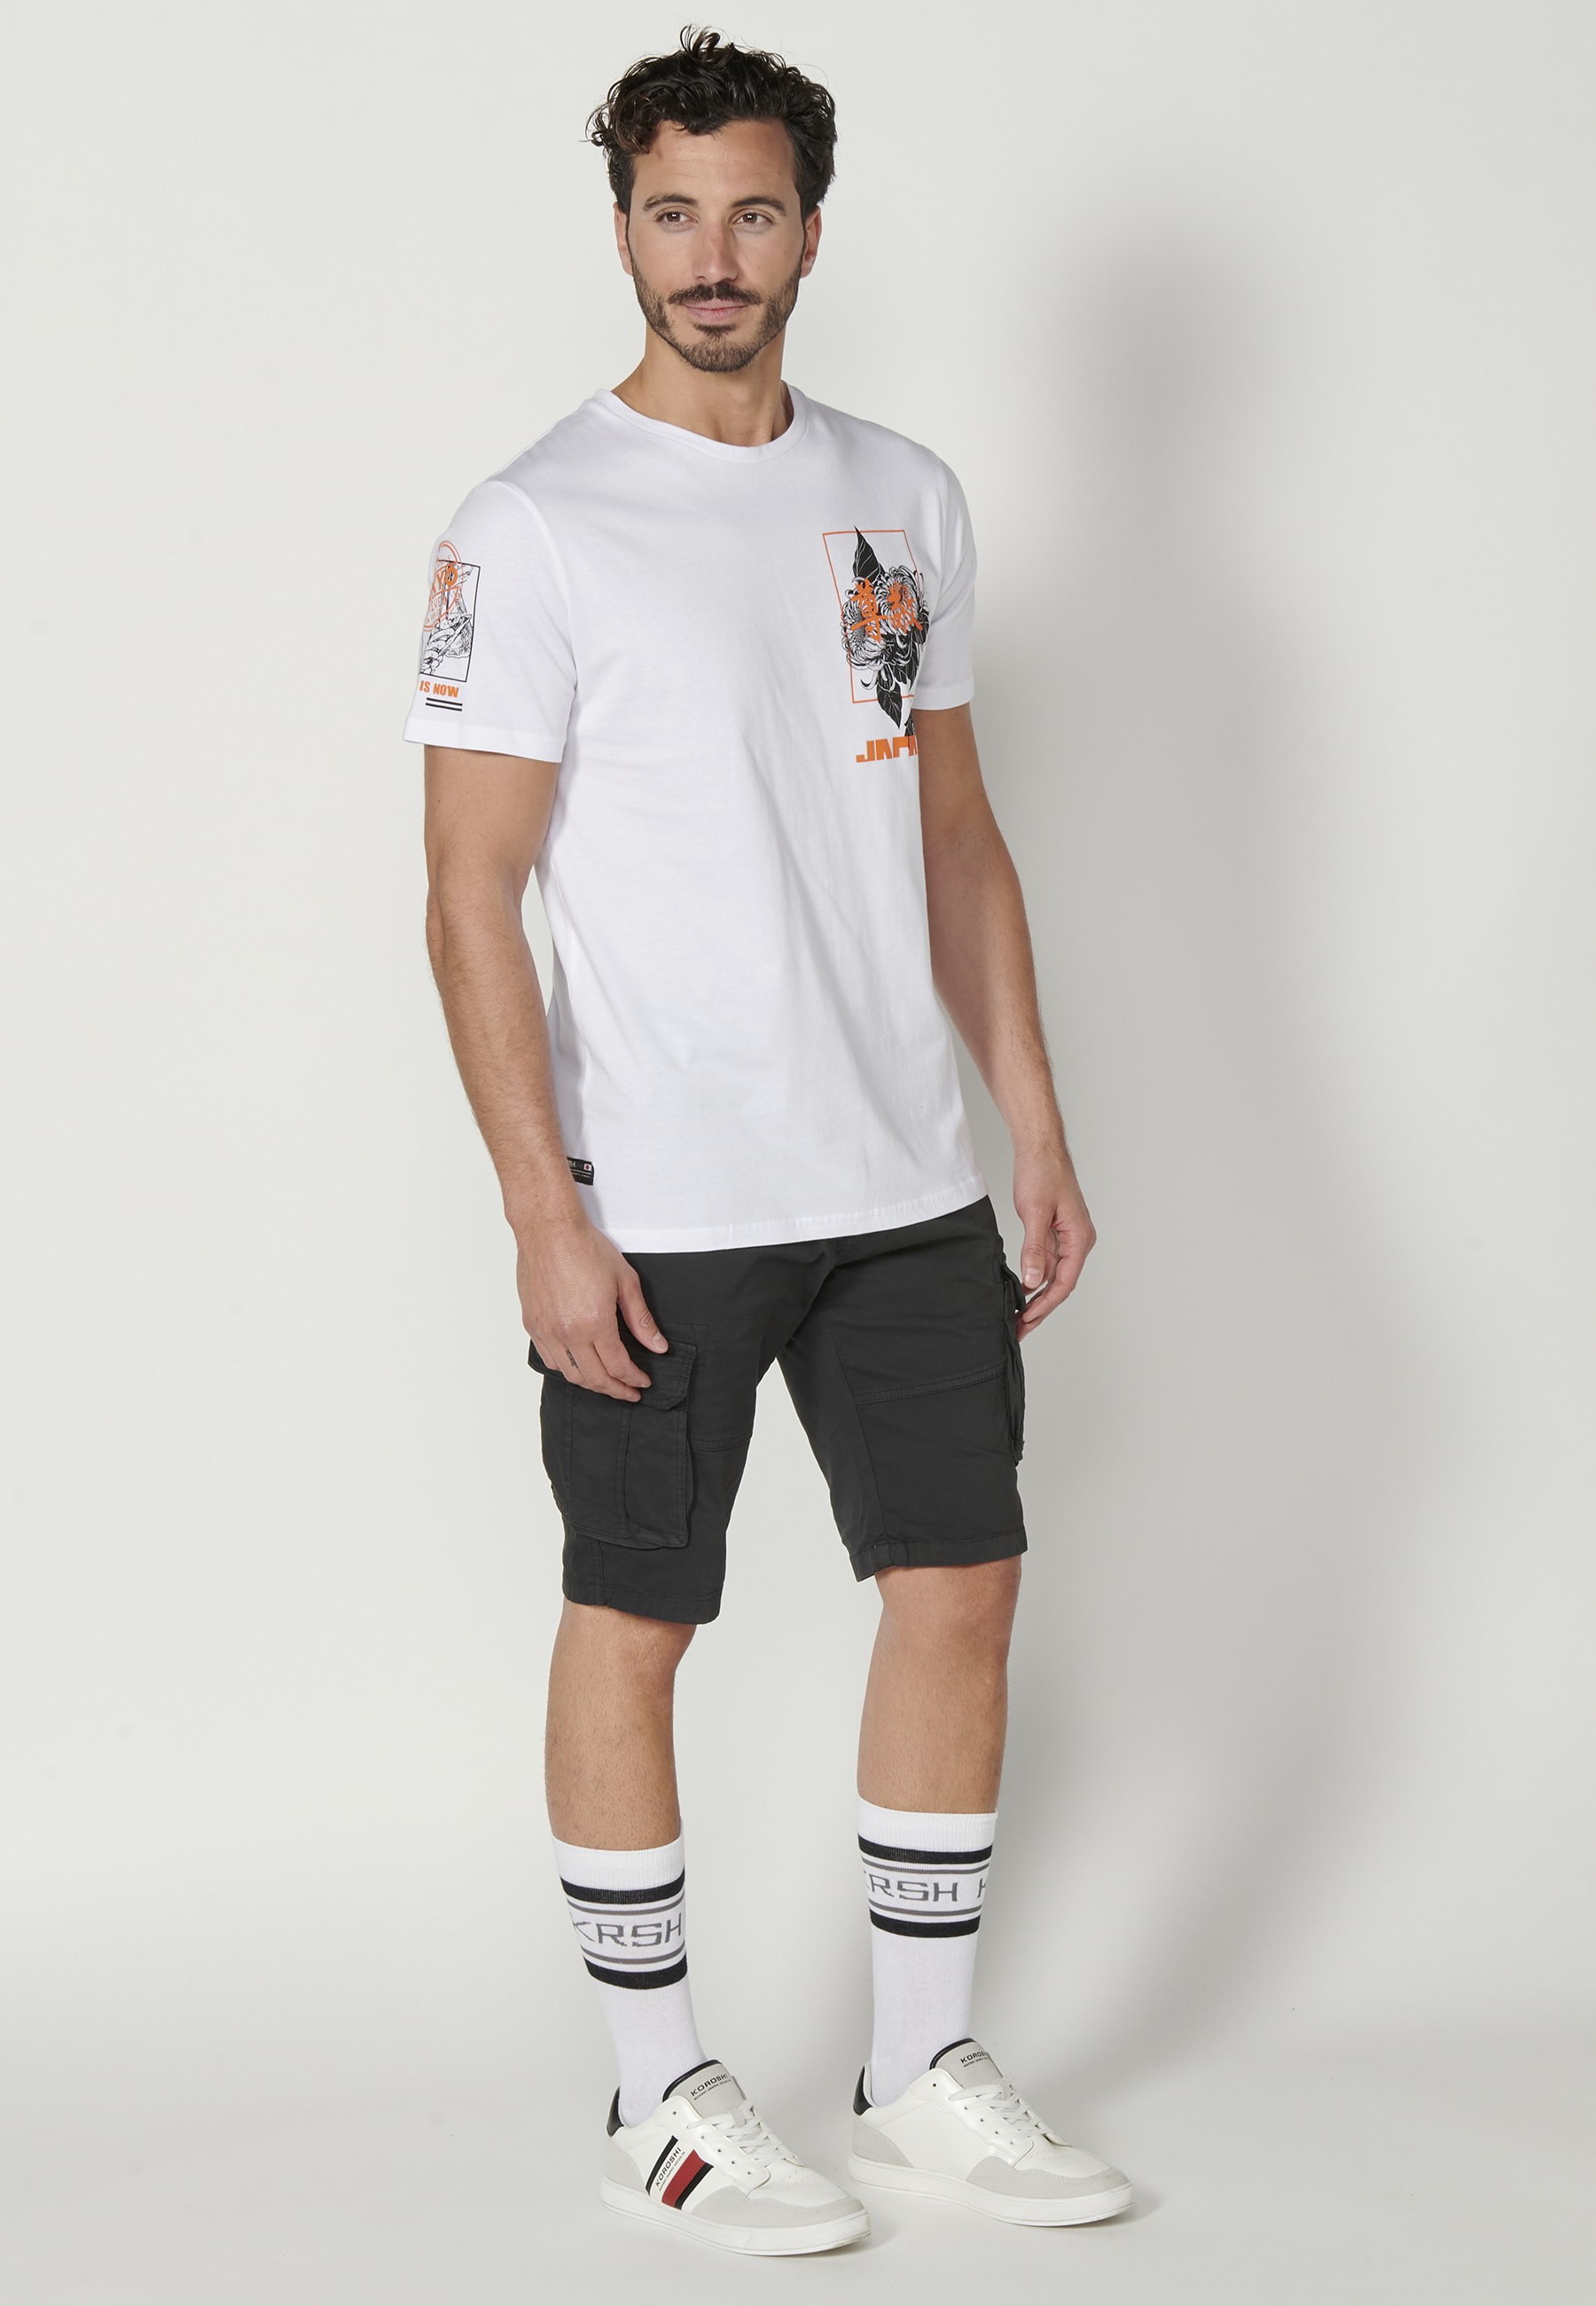 Short-sleeved Cotton T-shirt with front, back and sleeve print White Color for Men